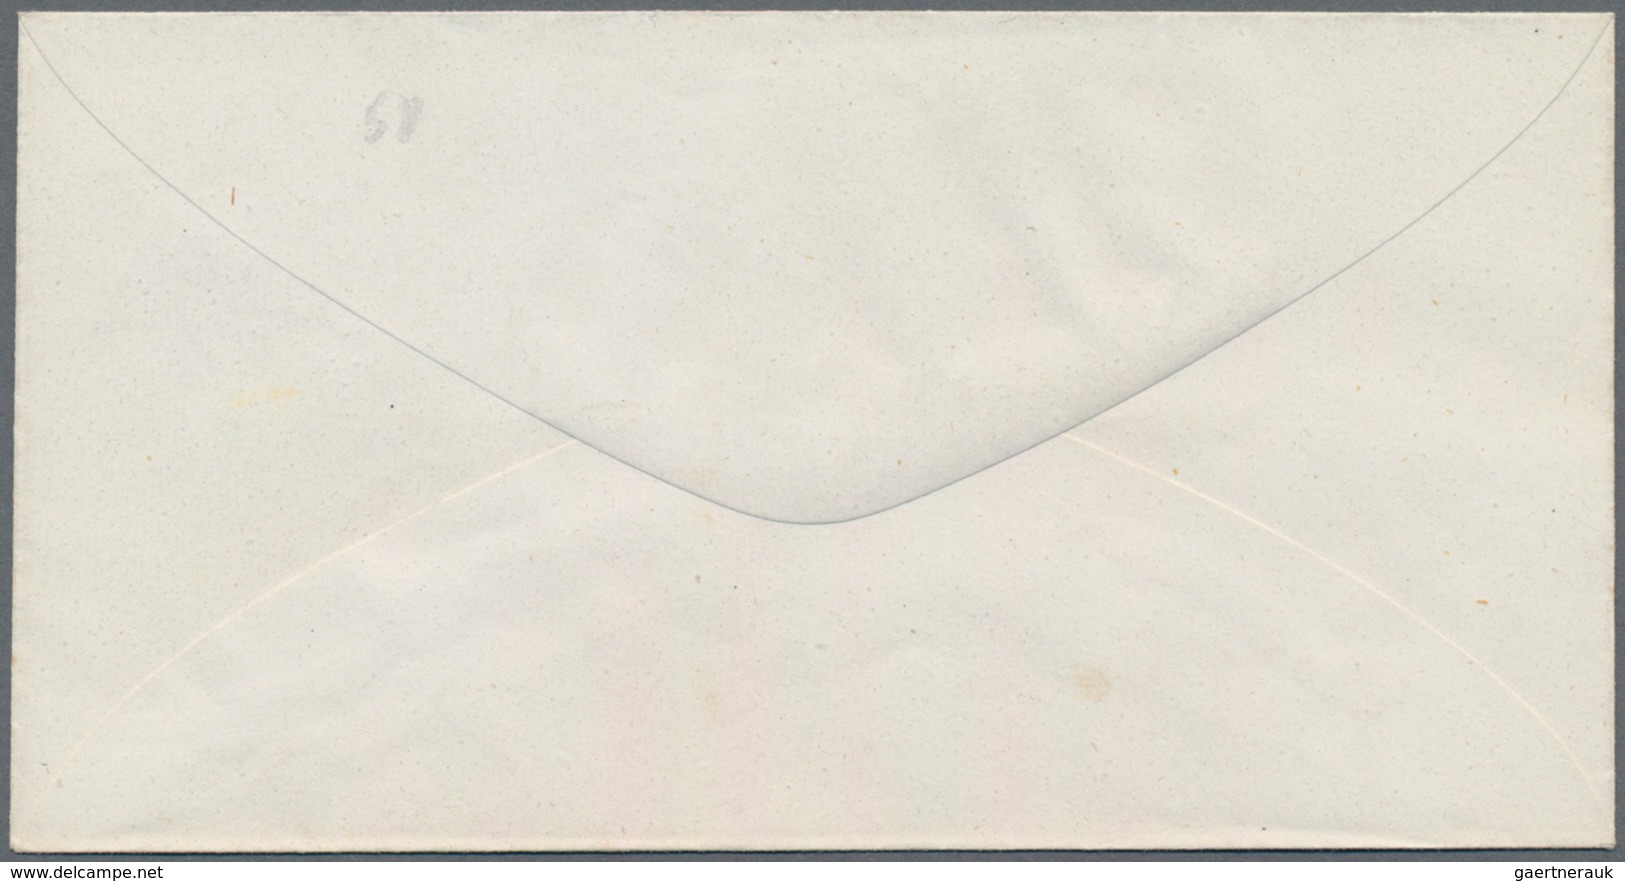 Rumänien - Ganzsachen: 1862-1864 (about) Project For The First Postal Stationery Envelopes Of Romani - Postal Stationery